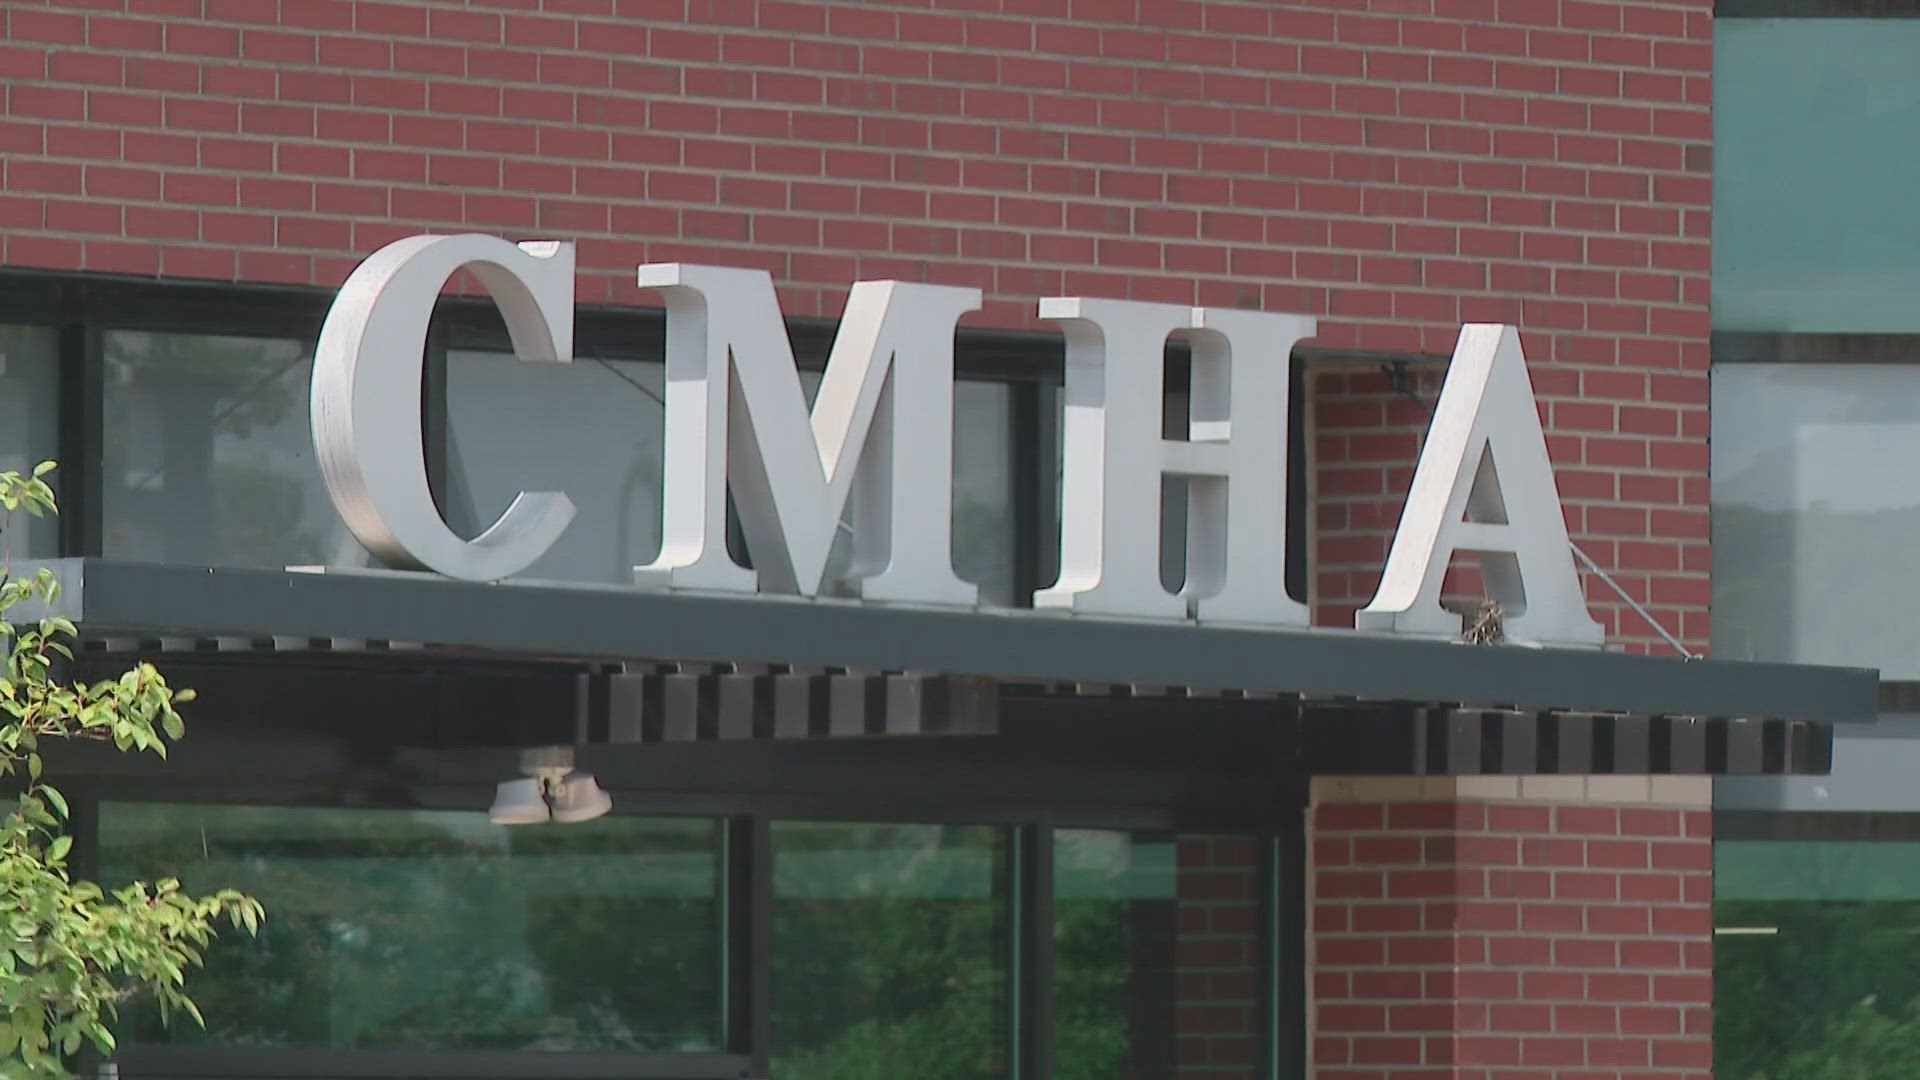 The results of the June audit led to the Columbus Metropolitan Housing Authority not renewing its contract with CGI Federal.